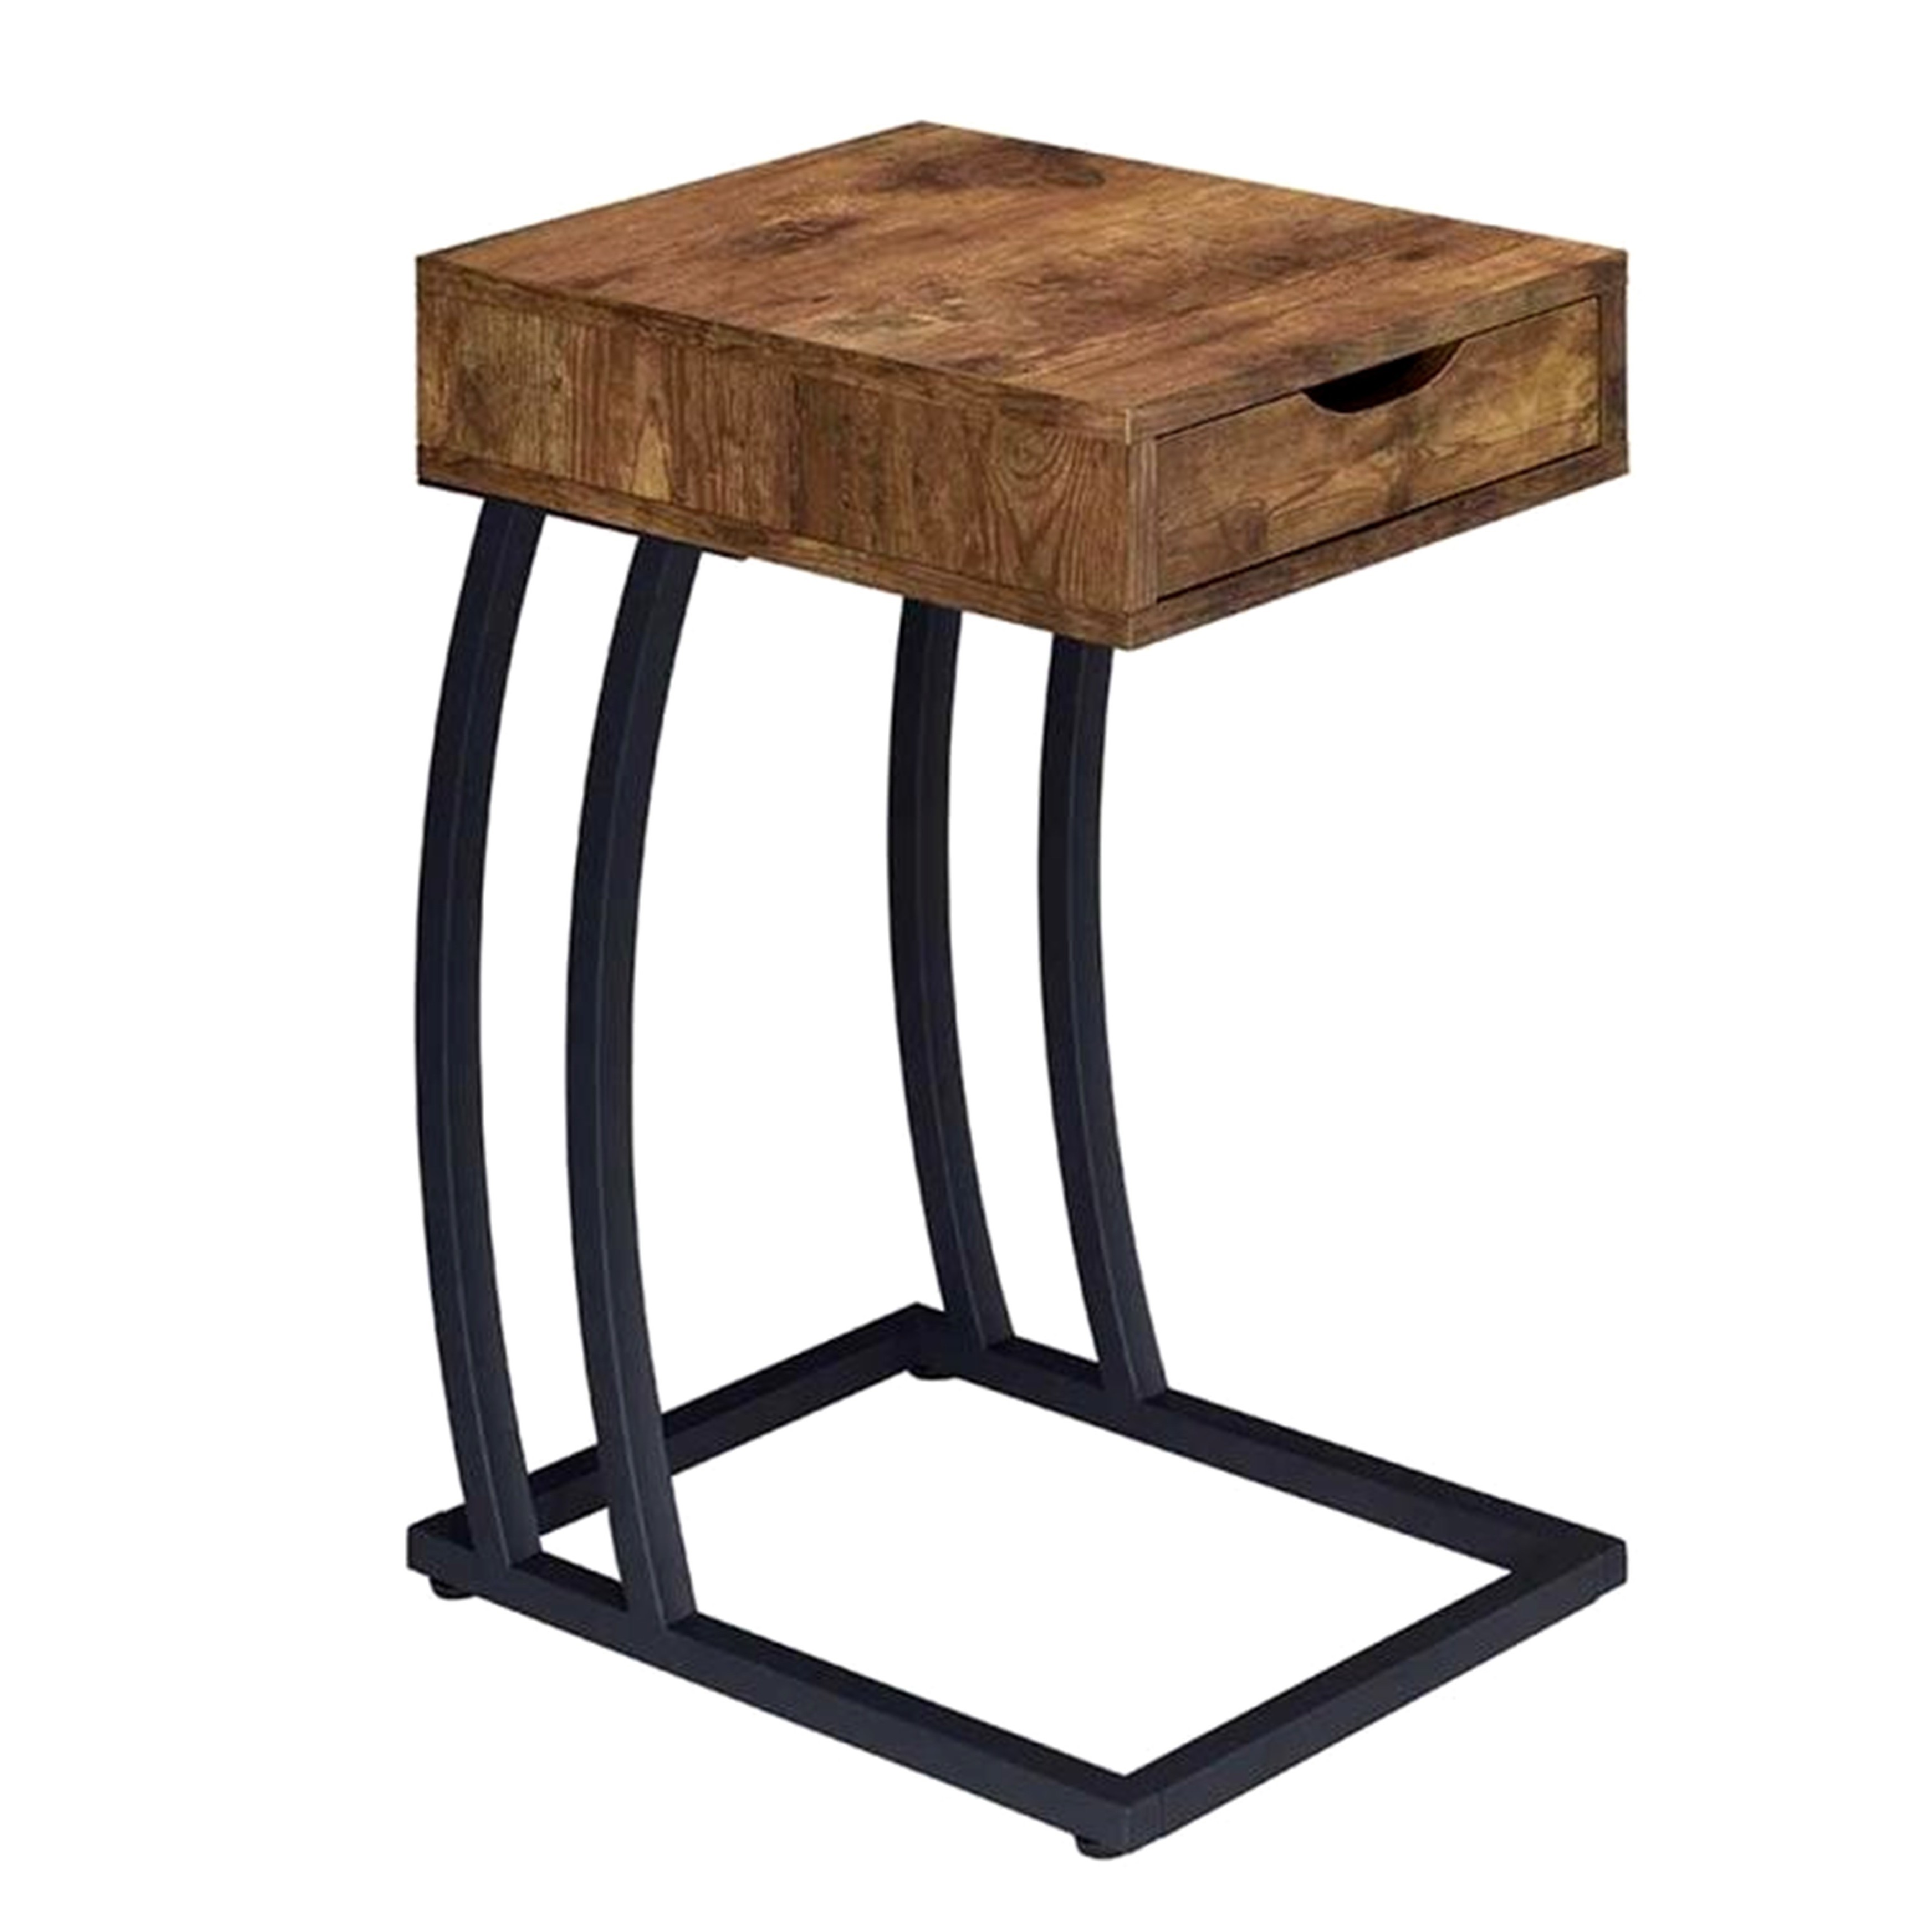 antique storage drawer snack accent table with power strip free shipping today tablecloth runners modern desk lamp jacket hoodie vita eos lampe black nest tables outdoor wicker